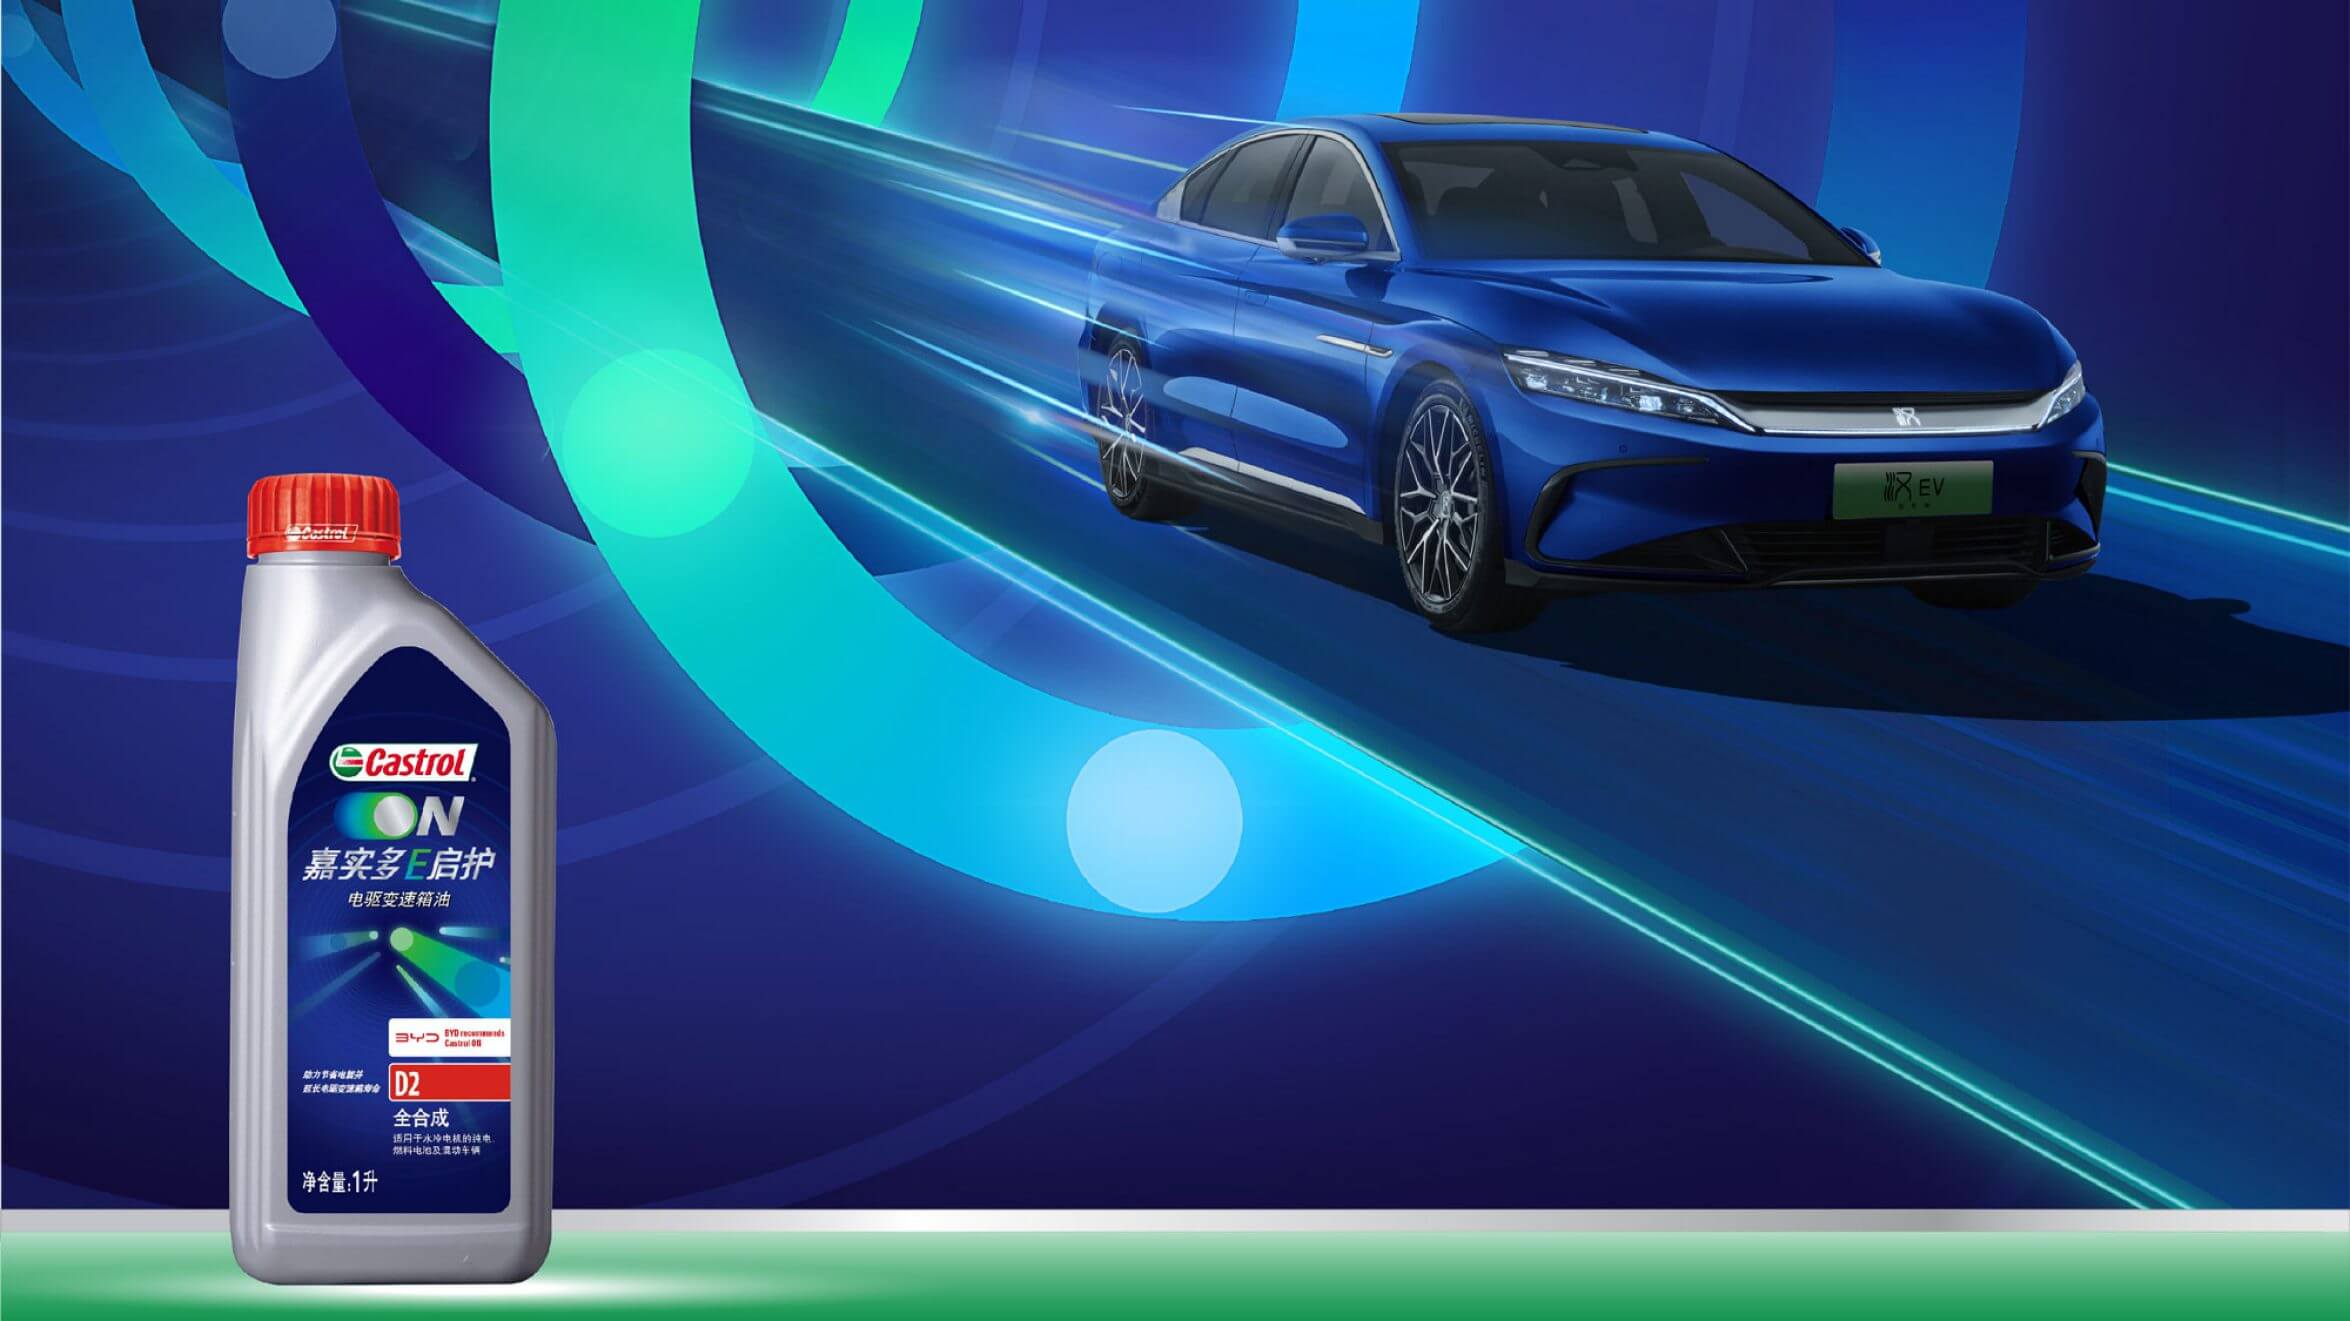 BYD will use Castrol EV fluids following a 2022 official agreement